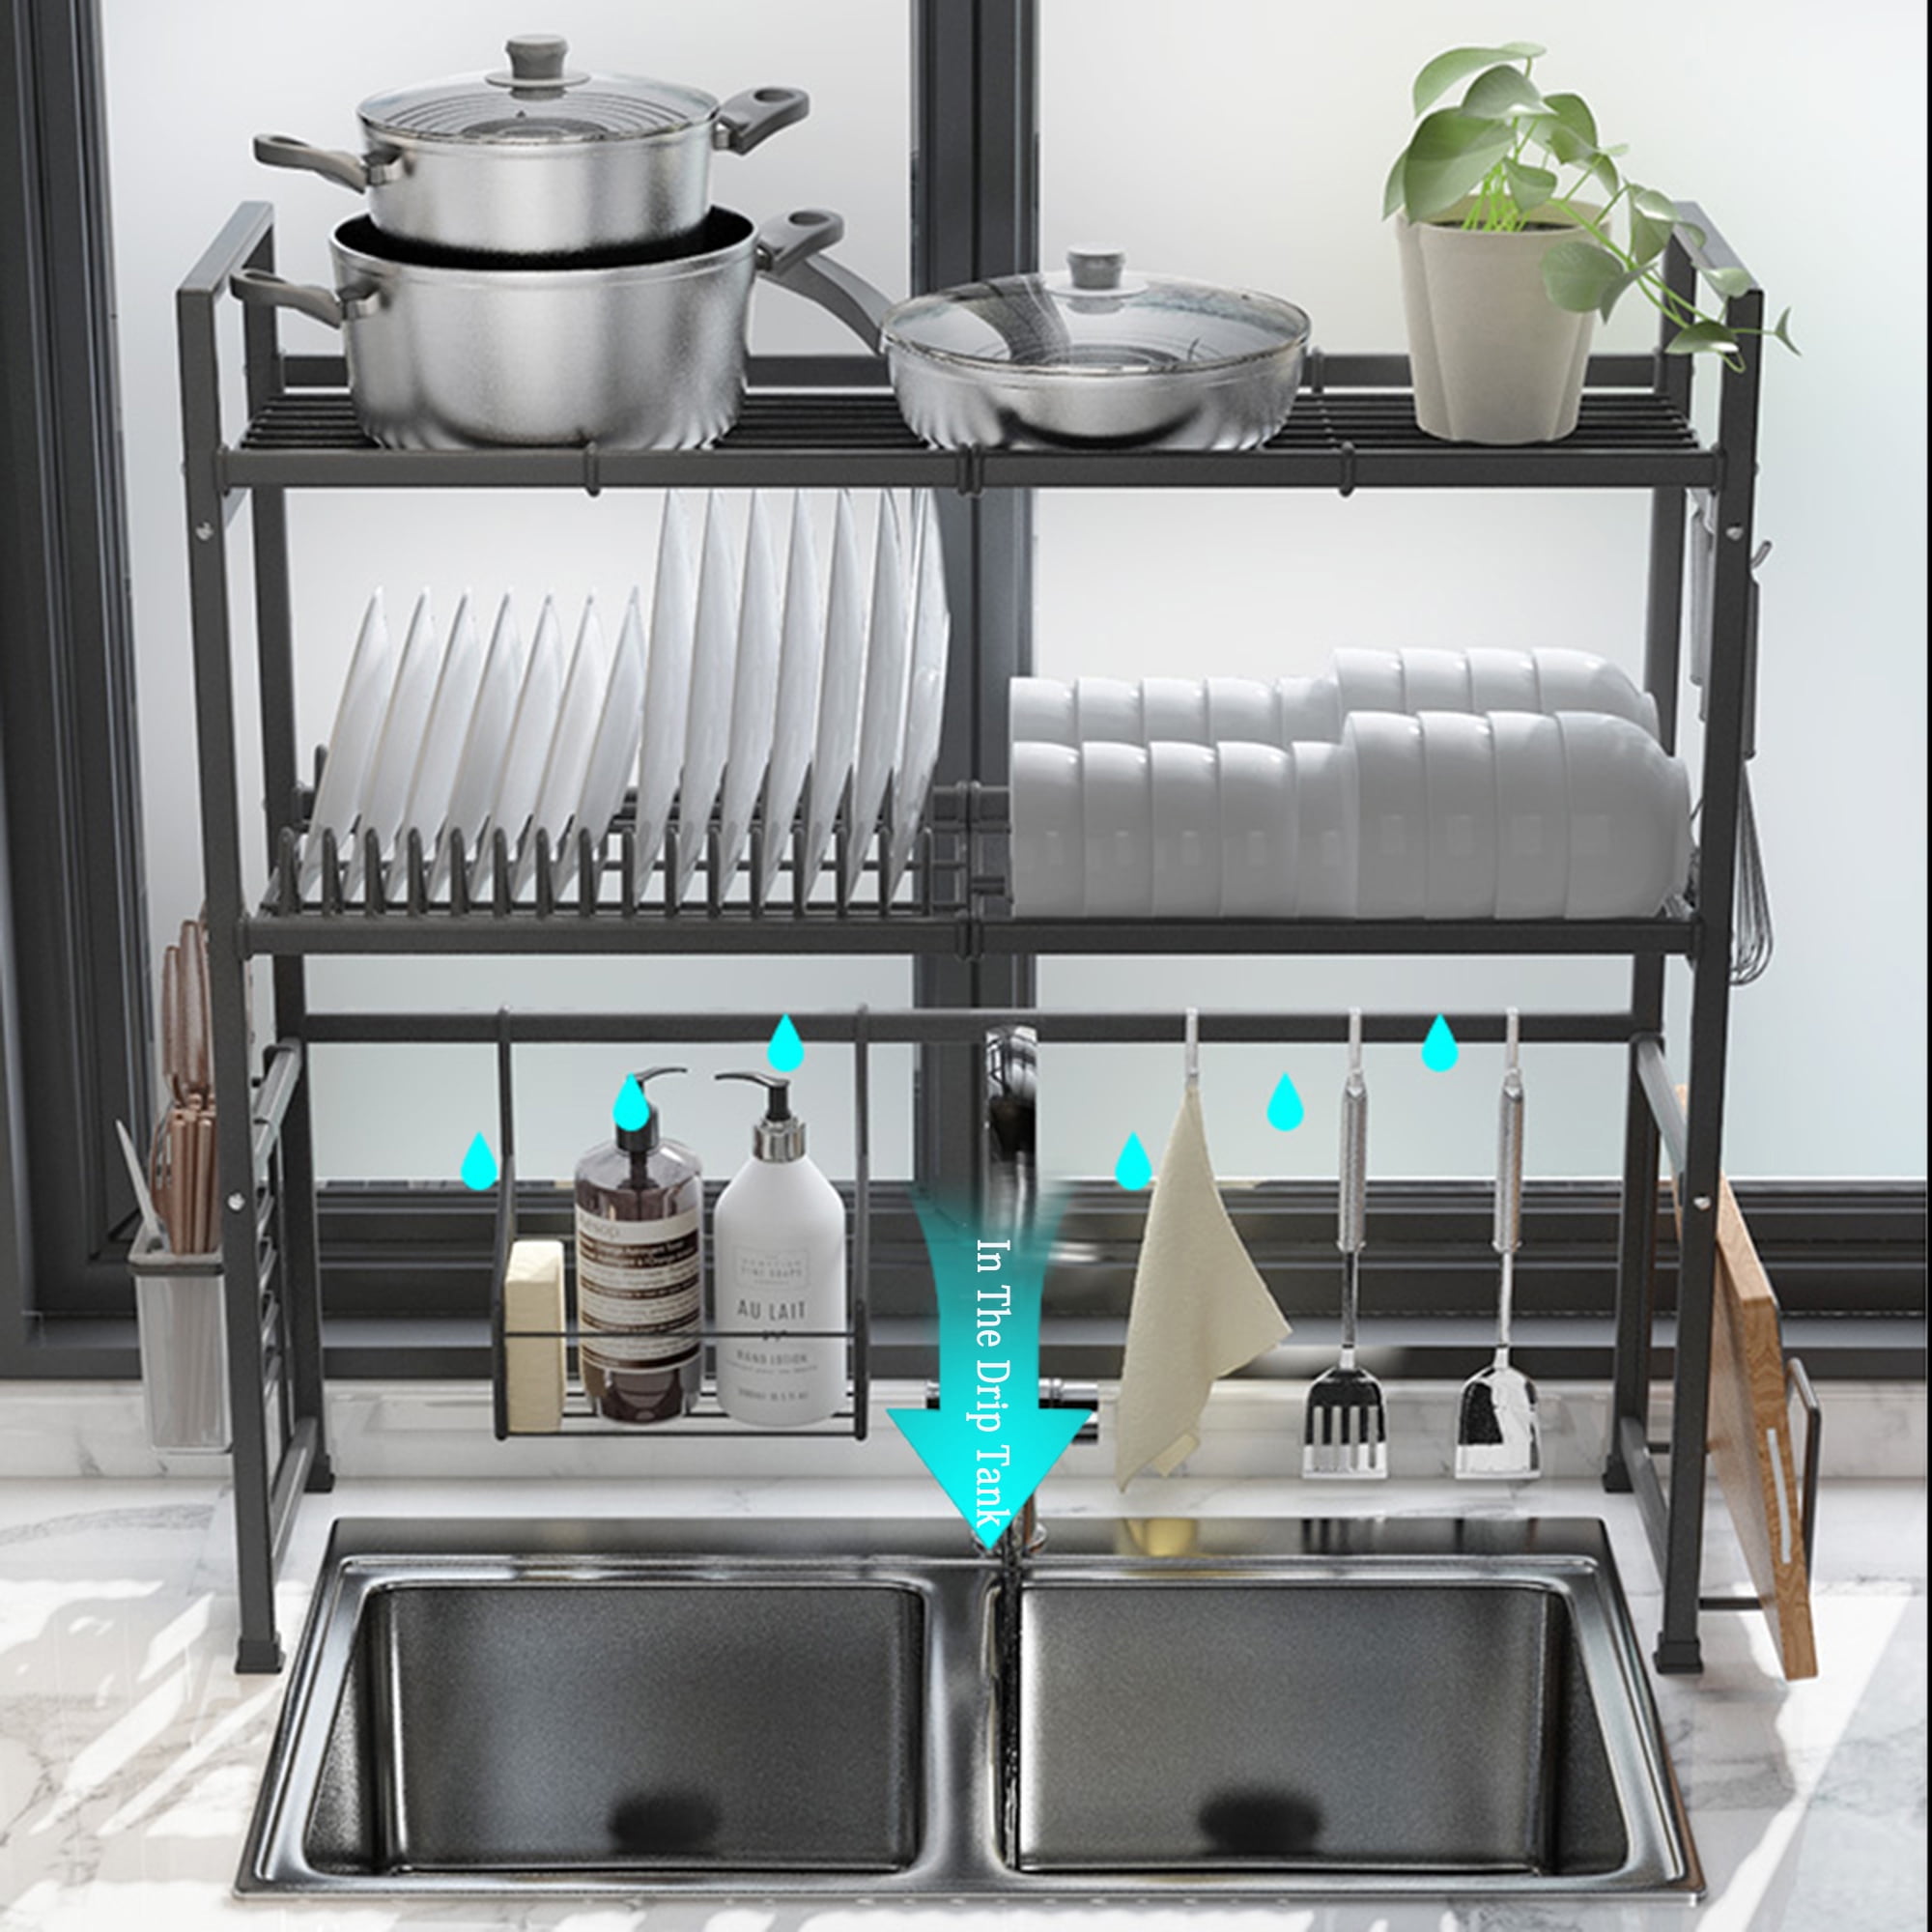 SHCKE Over The Sink Dish Drying Rack Small Over Counter Dish